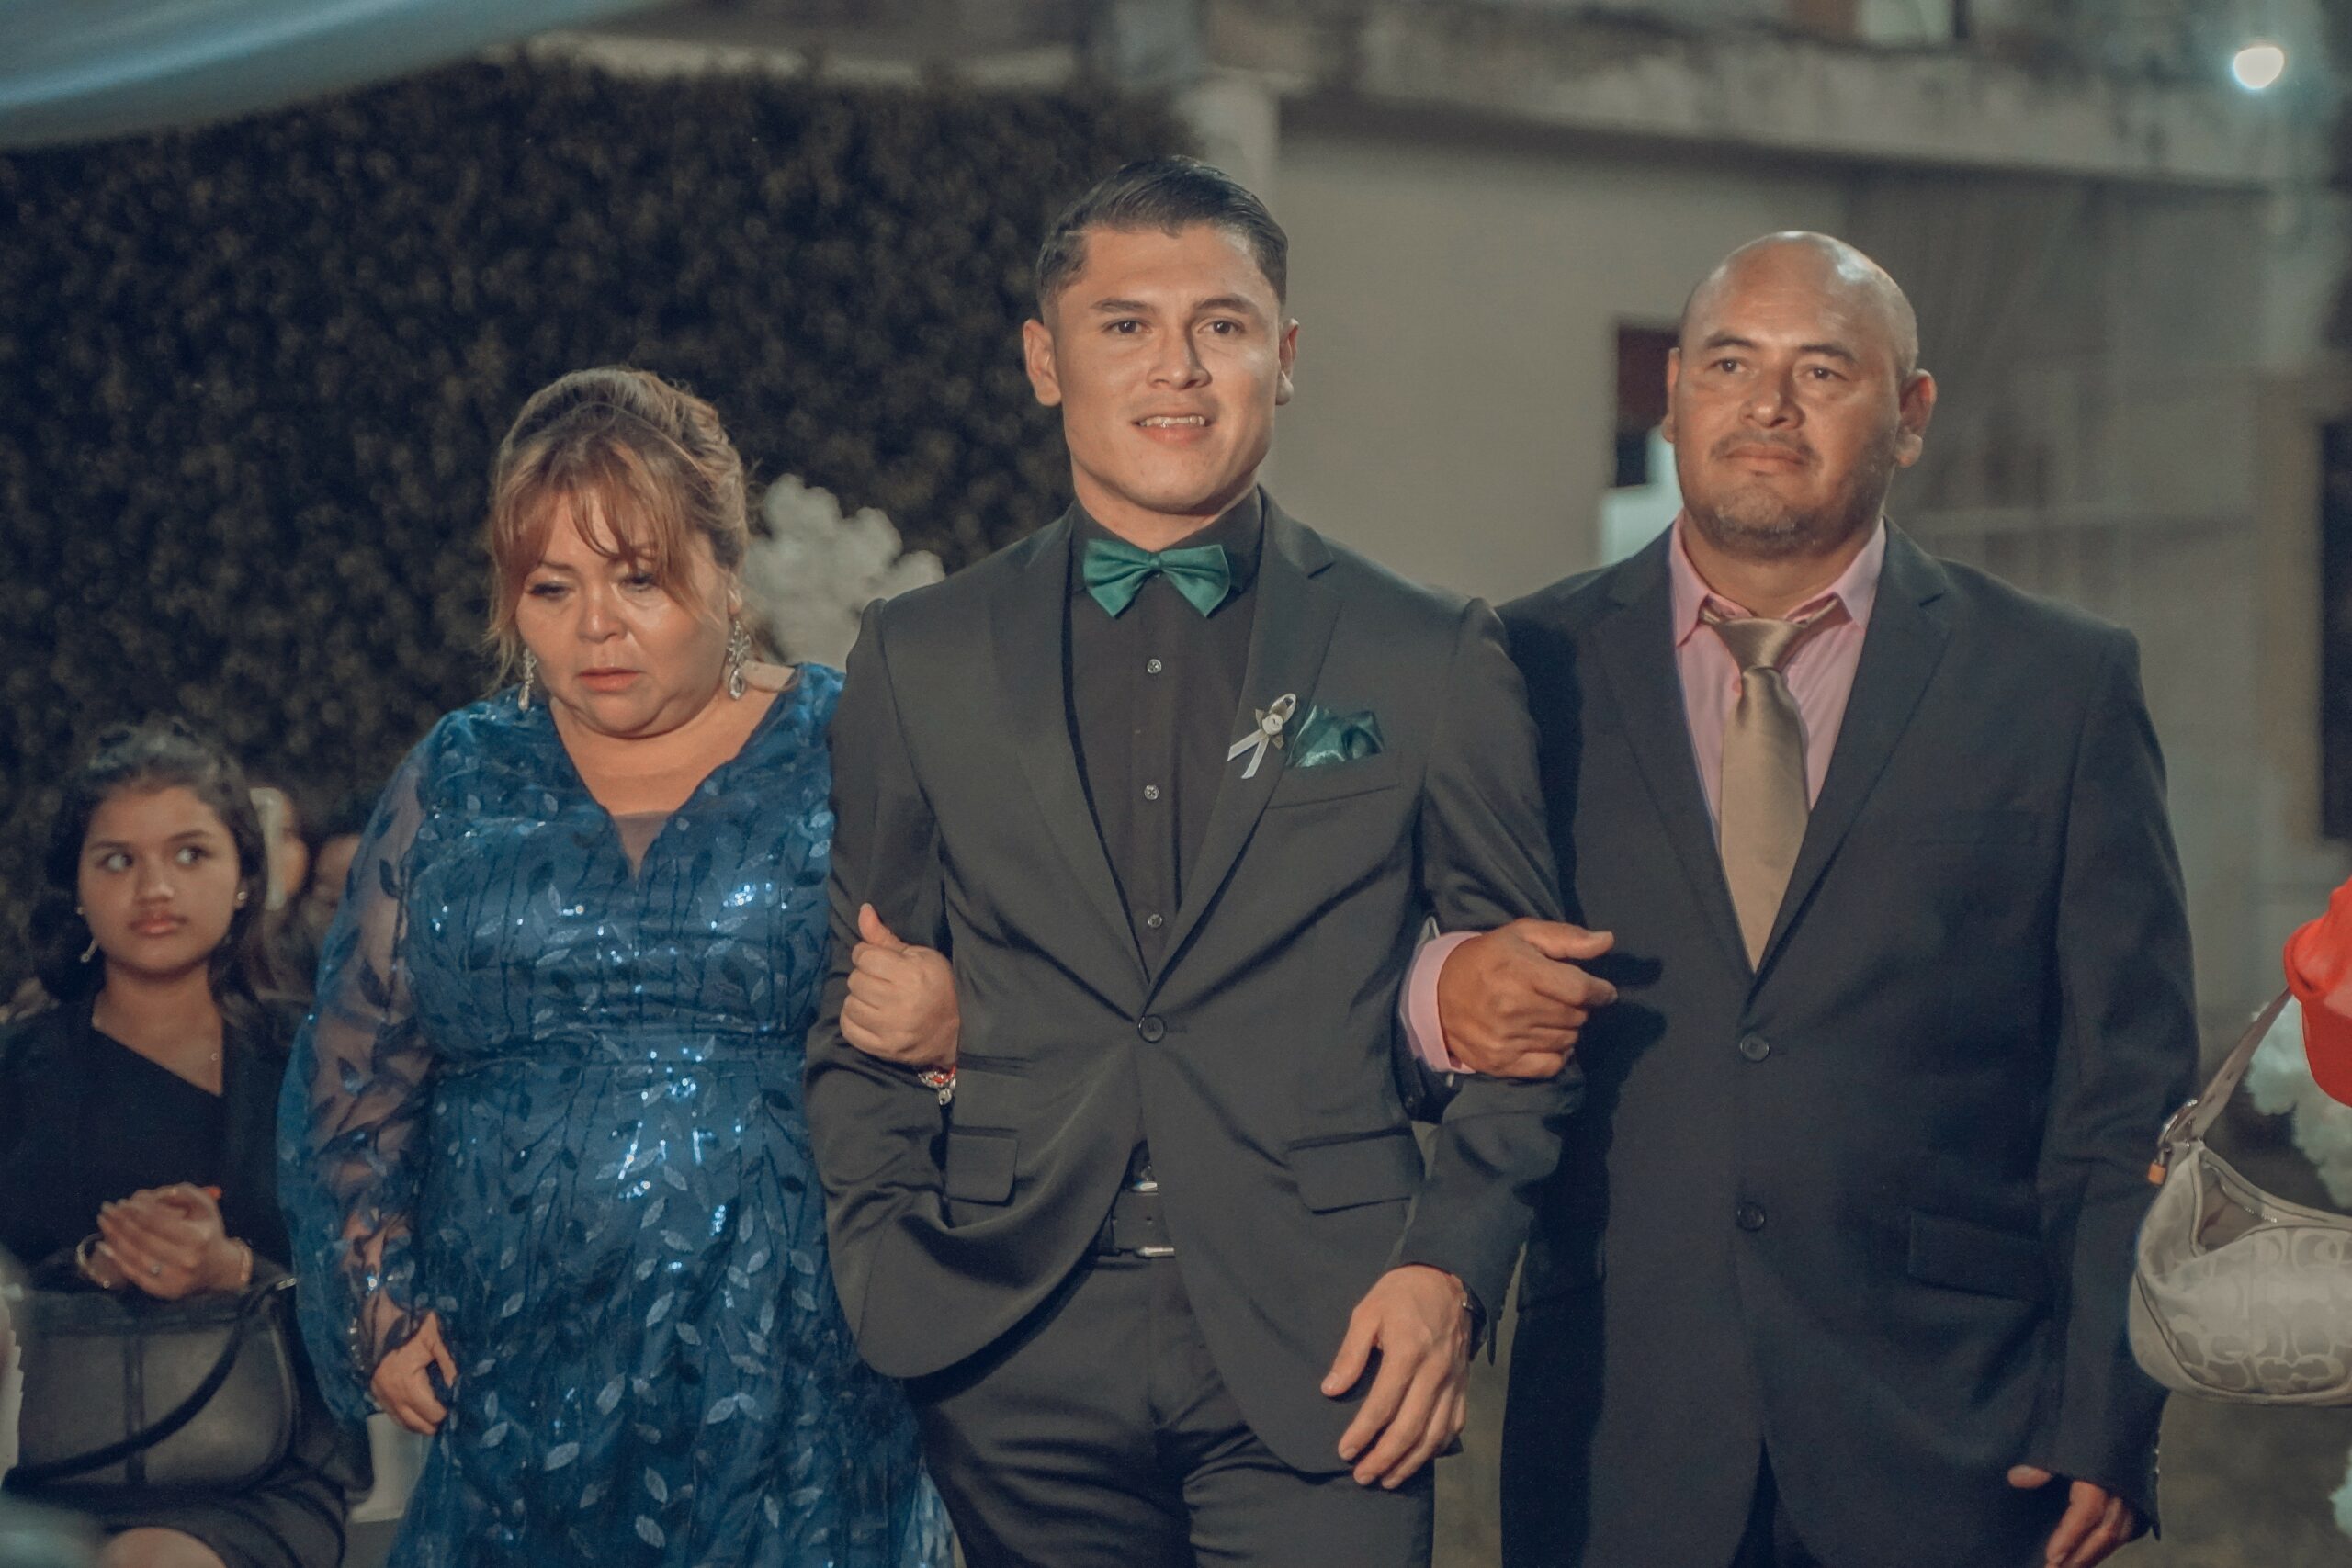 groom and his parents Pexels